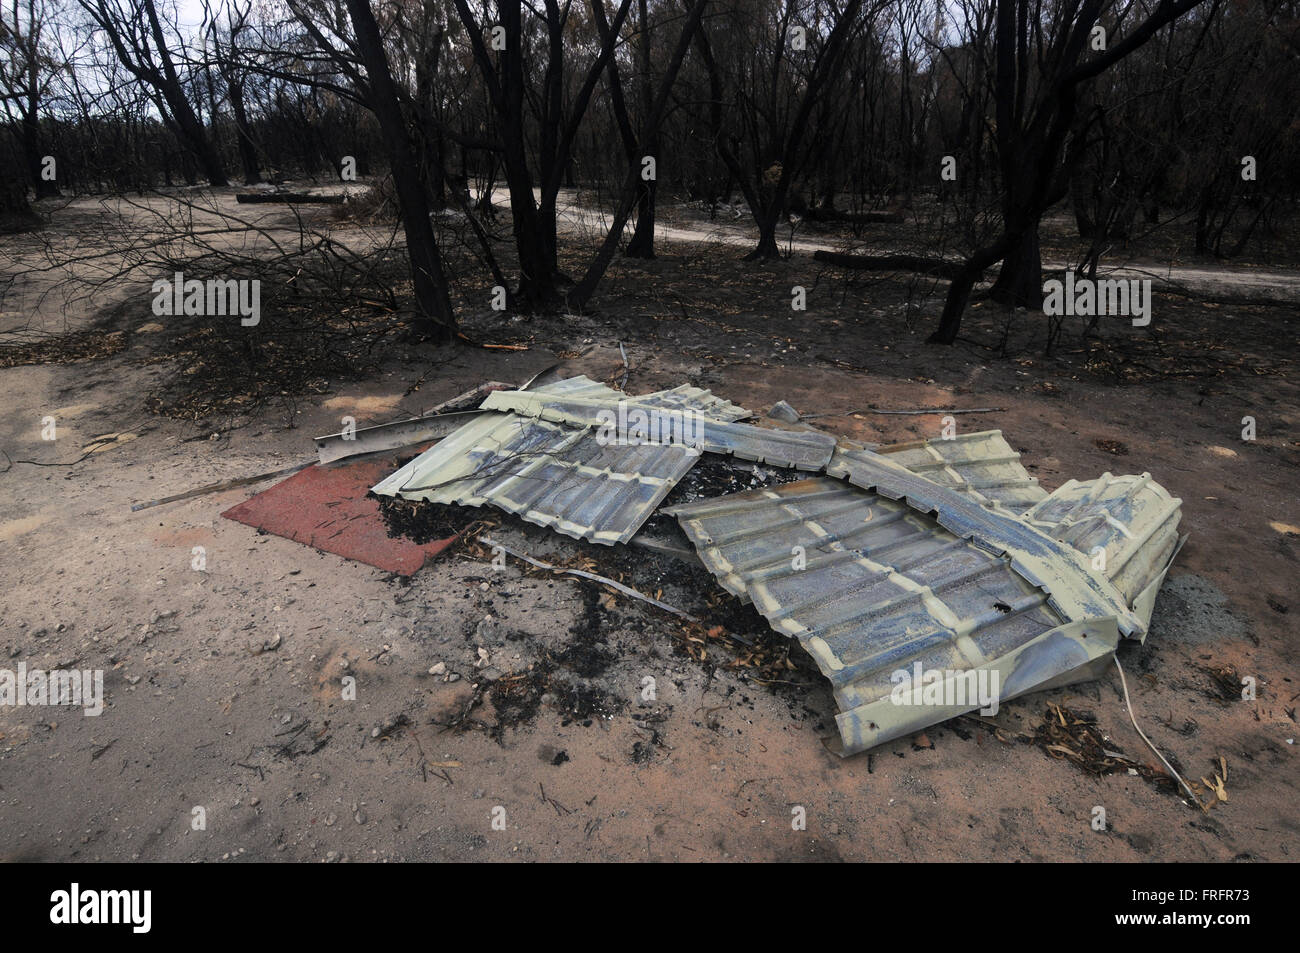 Preston Beach, southwest Western Australia - 22 March 2016 - Remains of a picnic shelter amongst blackened tree trunks. Early signs of regrowth after the devastating January 2016 bushfires are starting to be seen in some of the Australian native forest ecosystems in the region following recent rains. Credit:  Suzanne Long/Alamy Live News Stock Photo